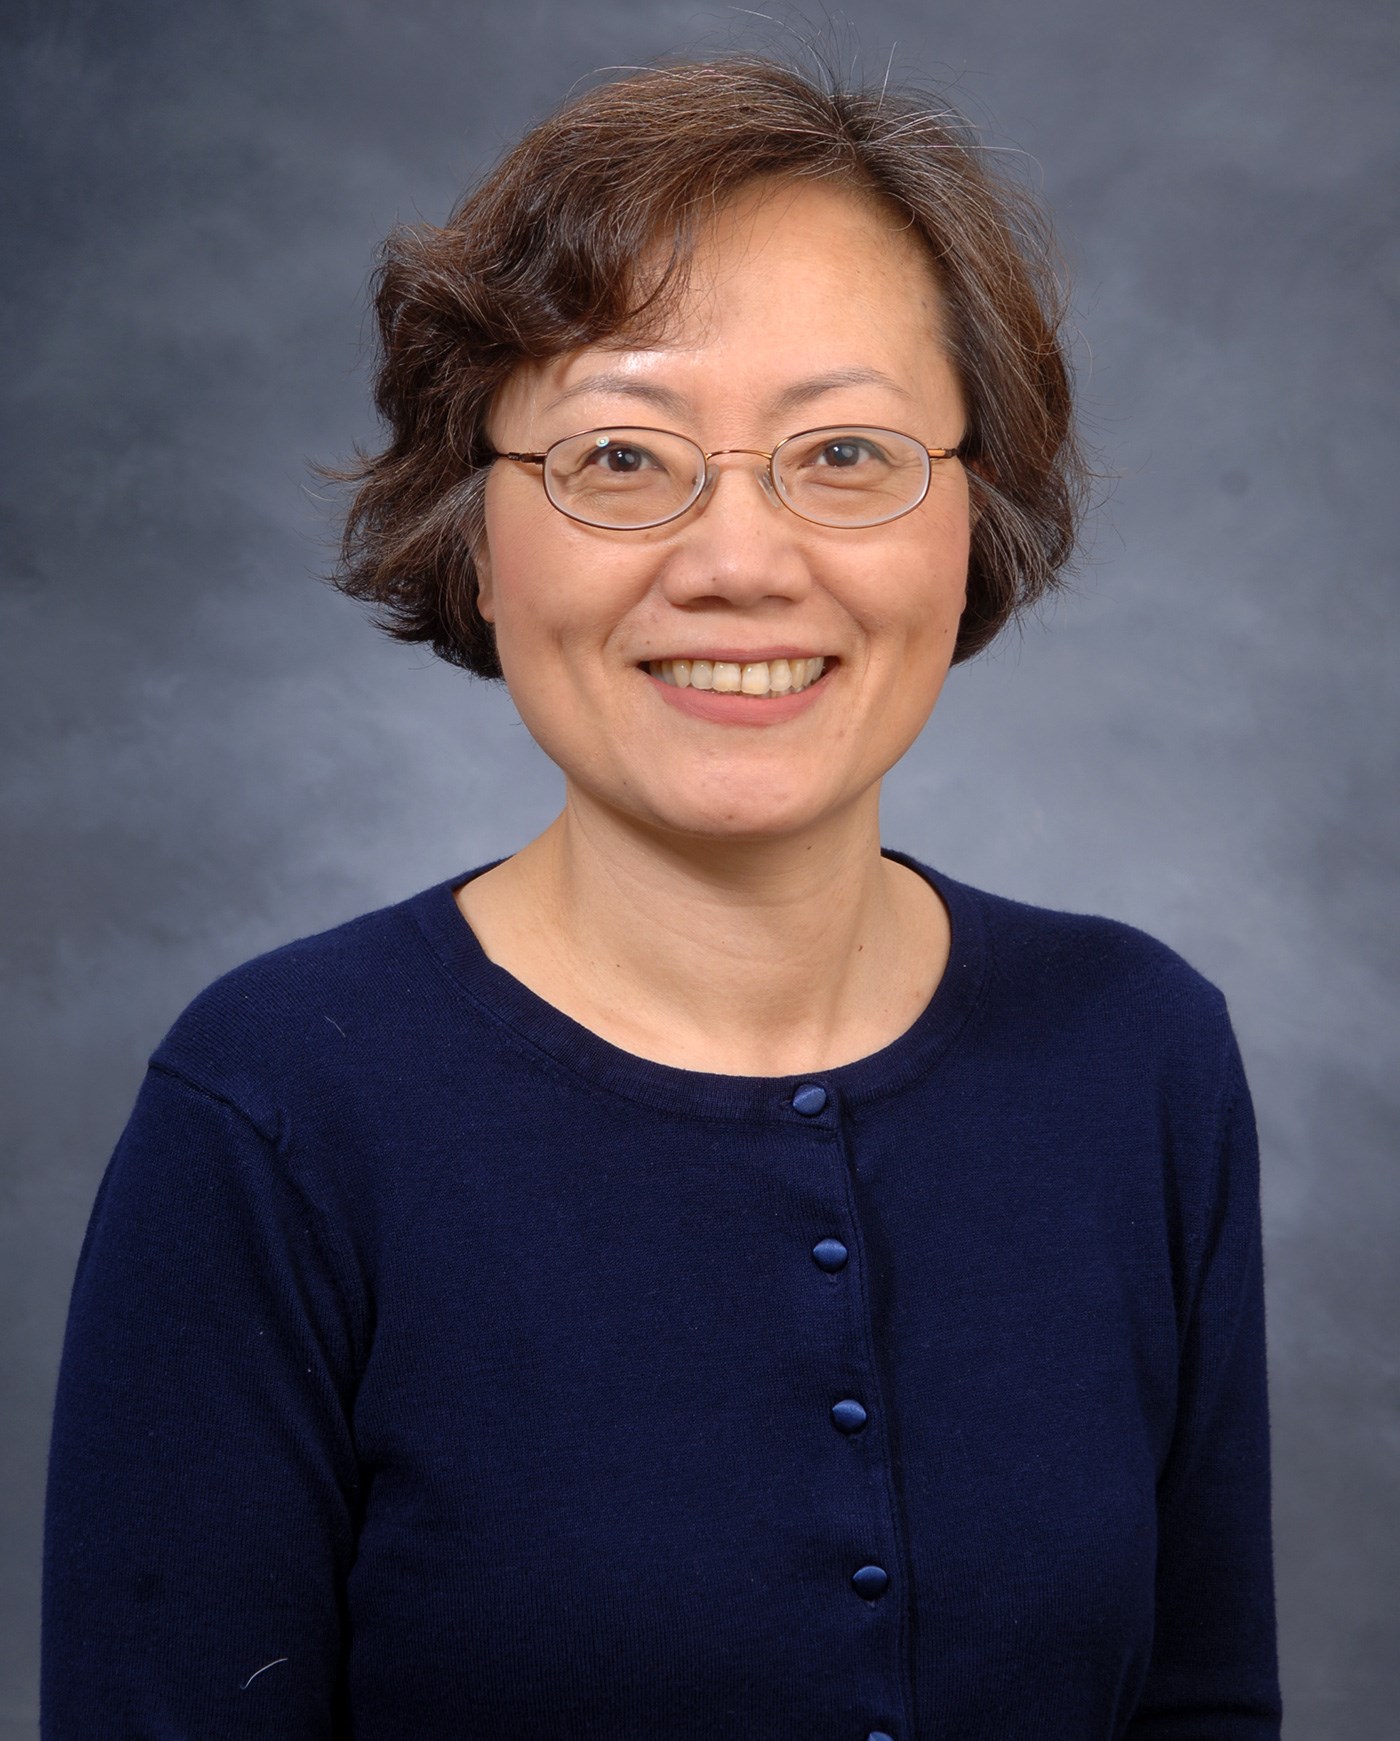 Xiaoqi (Jackie) Zhang is a professor in the department of Civil & Environmental Engineering at UMass Lowell.